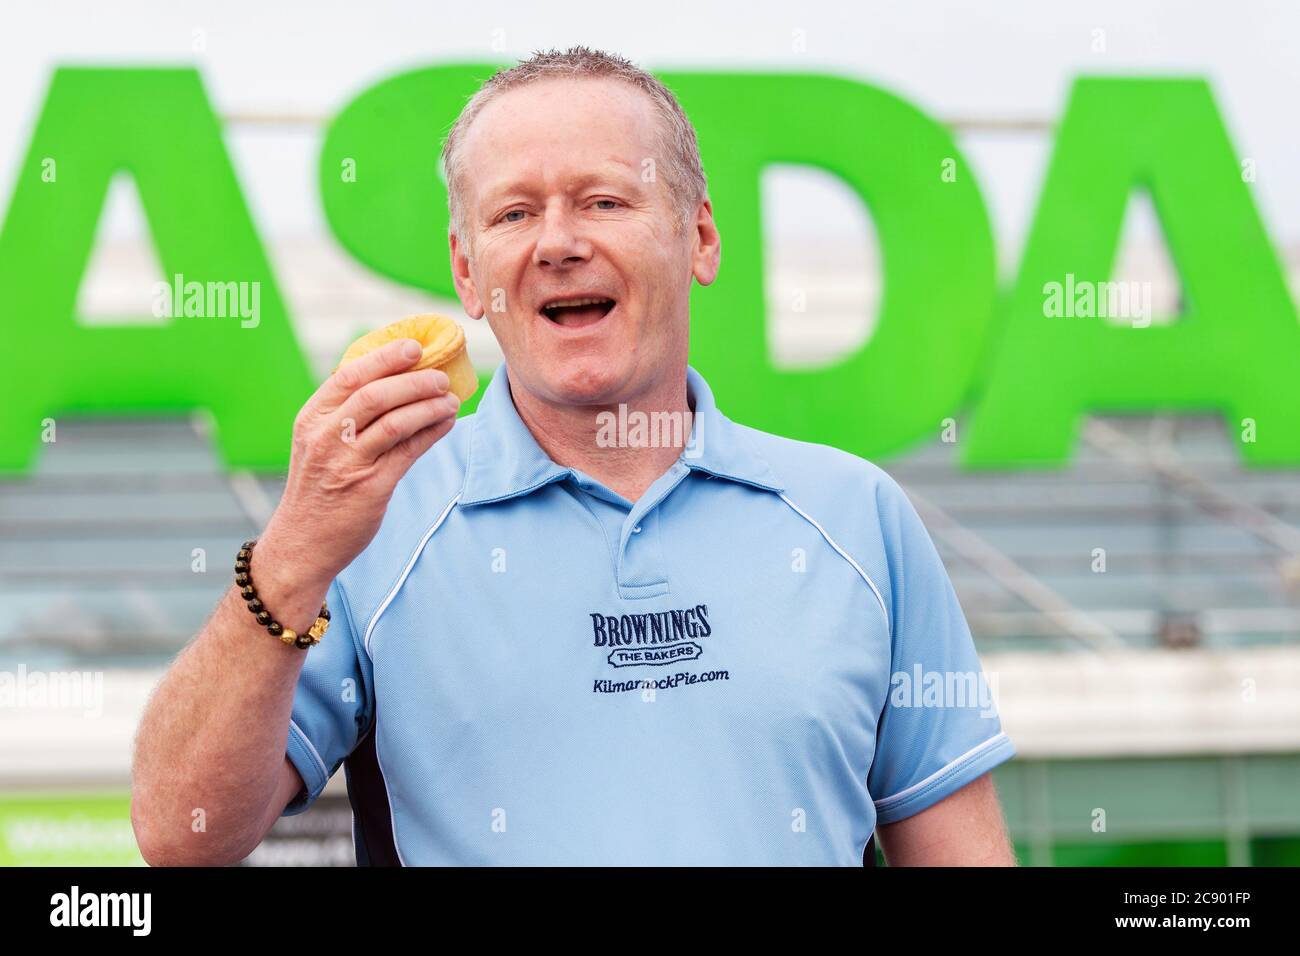 Pictured: Brownings the Bakers Managing Director, John Gall KILMARNOCK PIES HIT THE ASDA AISLES! Brownings the Bakers has ‘kicked Stock Photo